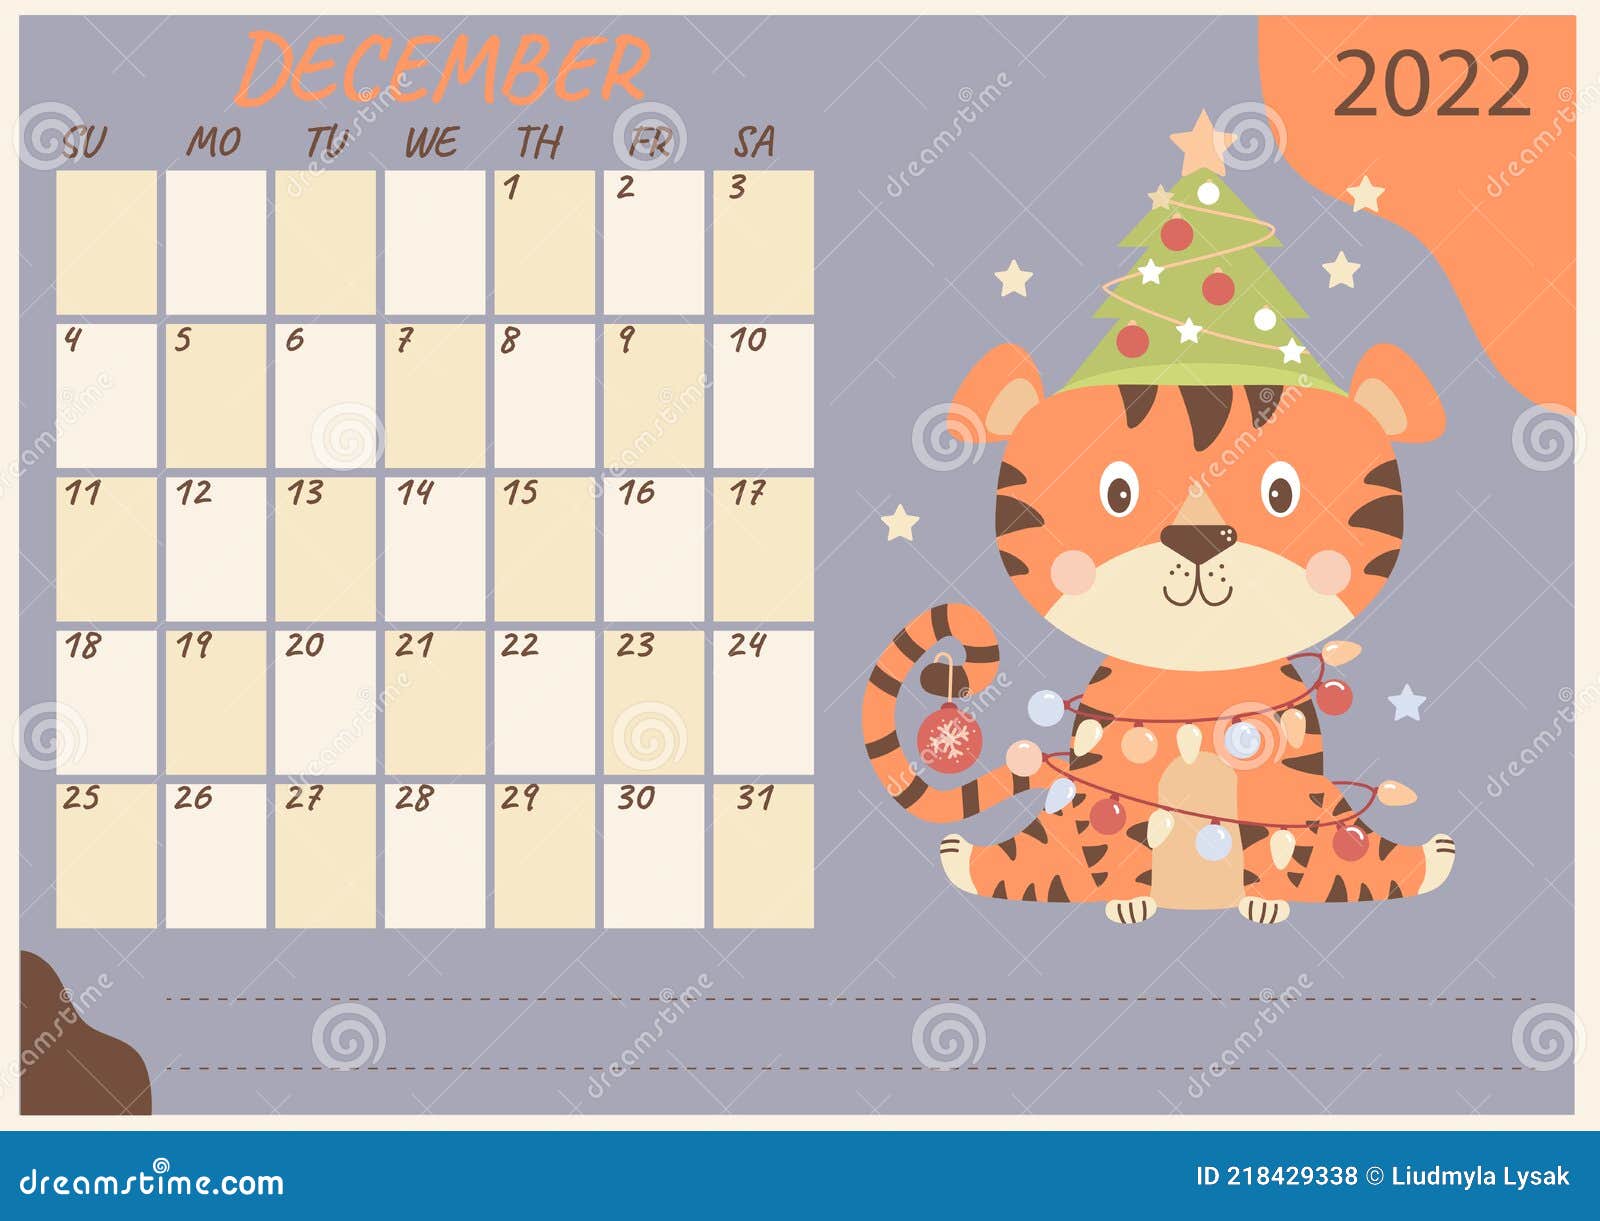 December 2022 Calendar Template Planner Calendar Template For December 2022. Cute Tiger With Christmas  Tree, Toys And Garlands. Year Of The Tiger In Stock Vector - Illustration  Of Sunday, Stationery: 218429338